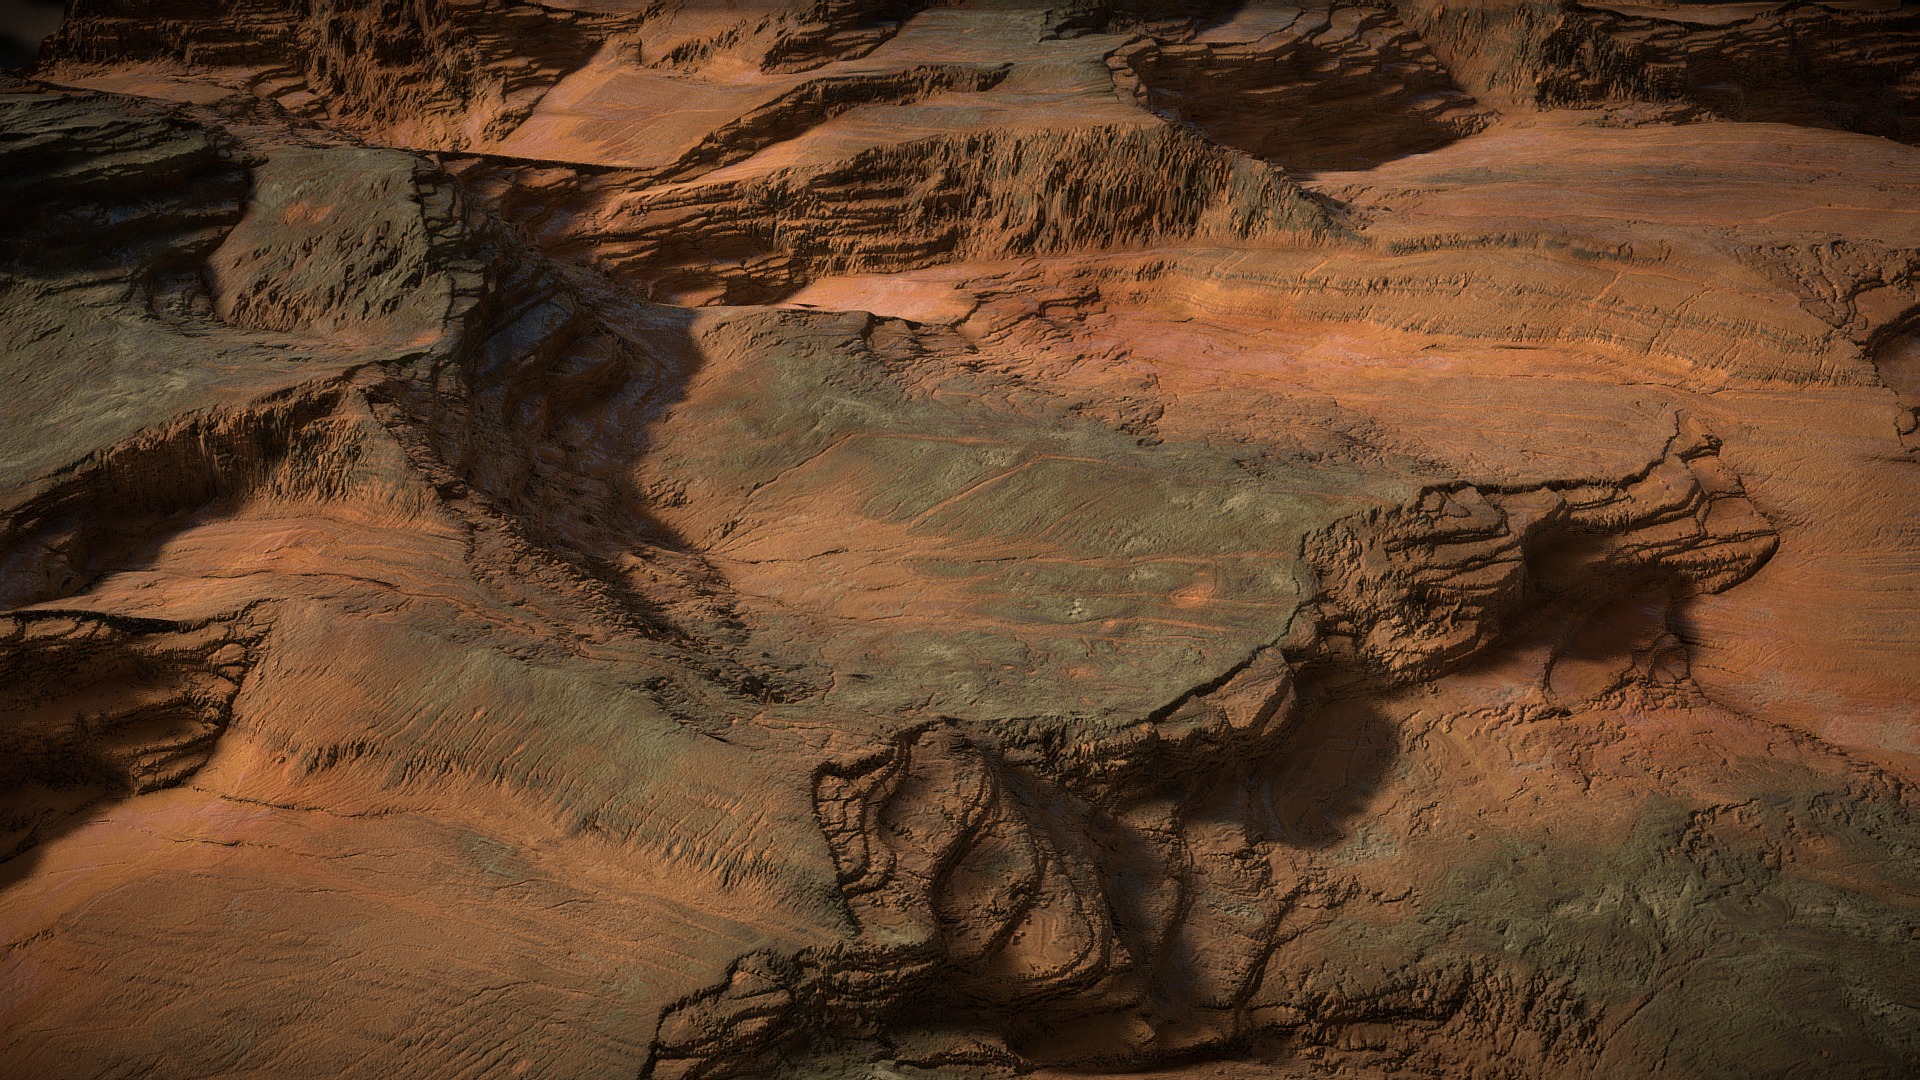 3D model Breaklands - This is a 3D model of the Breaklands. The 3D model is about a canyon with a river running through it.